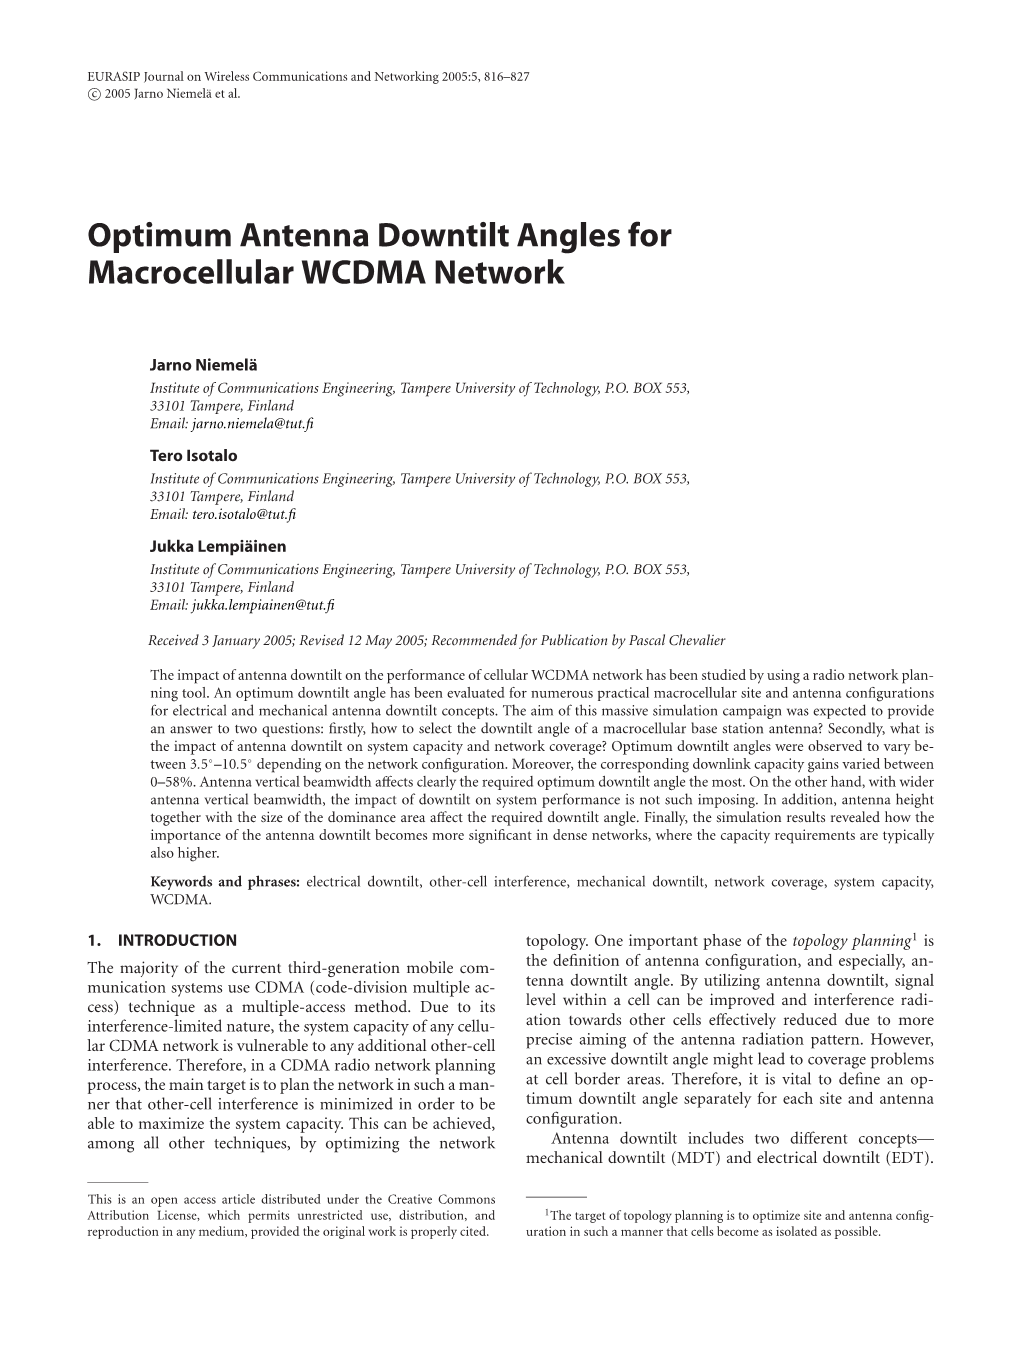 Optimum Antenna Downtilt Angles for Macrocellular WCDMA Network